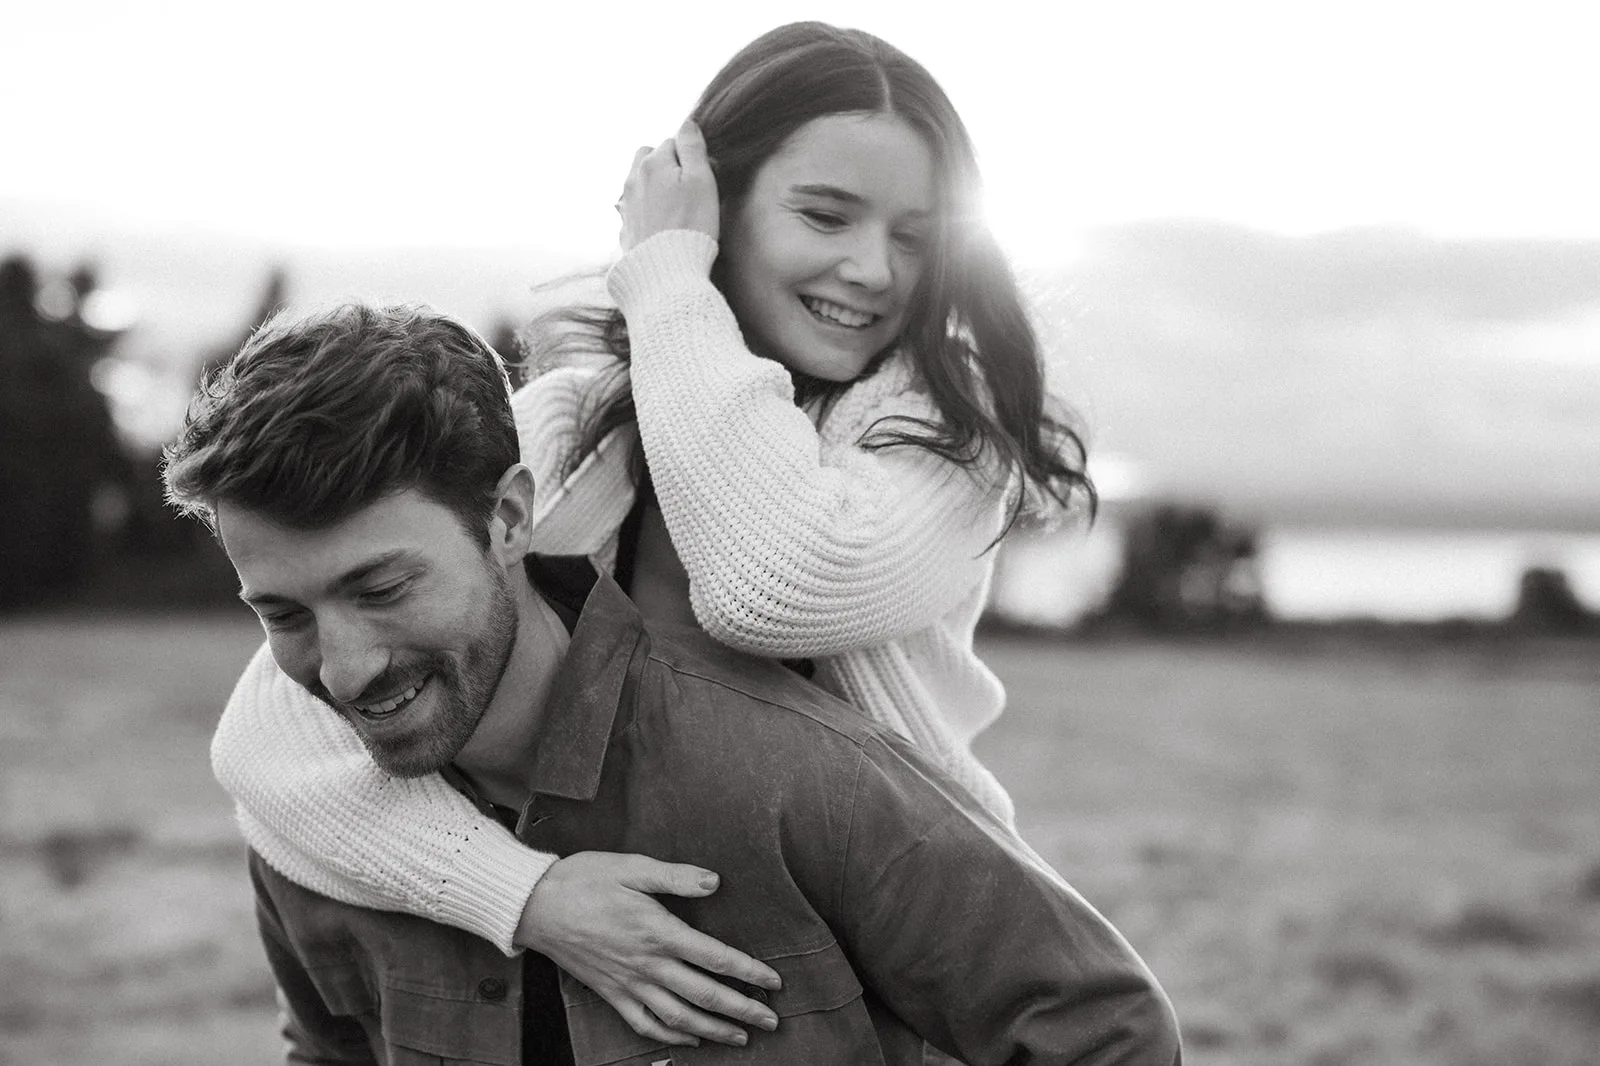 A black and white photo of a couple sharing a playful piggyback ride in a field, with the woman laughing and holding on to the man's back.